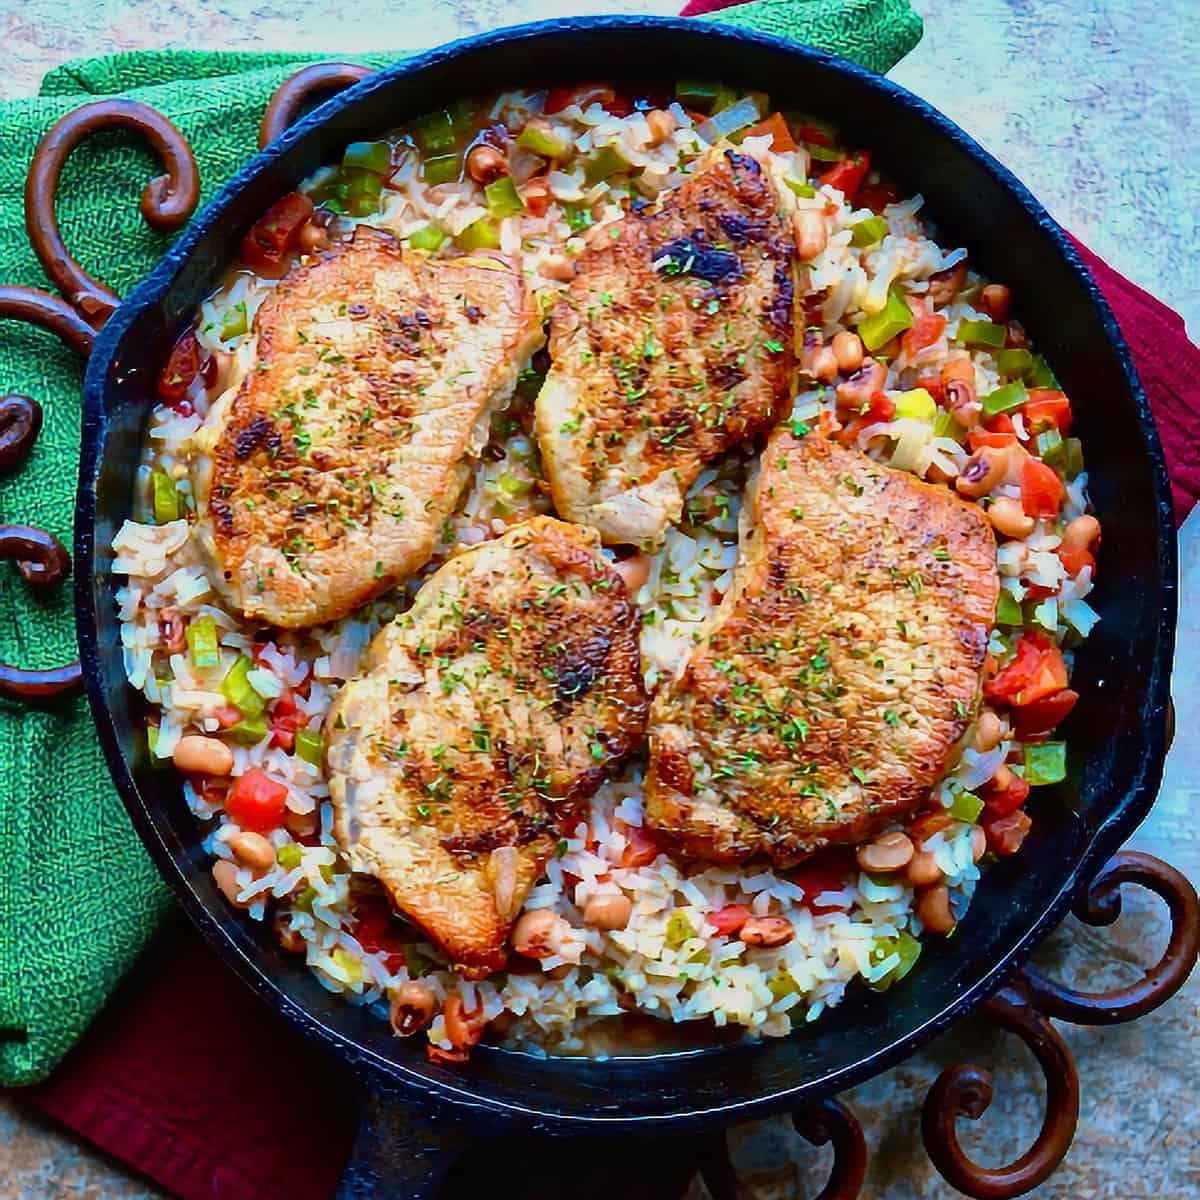 7. One Pan Pork Chops and Rice